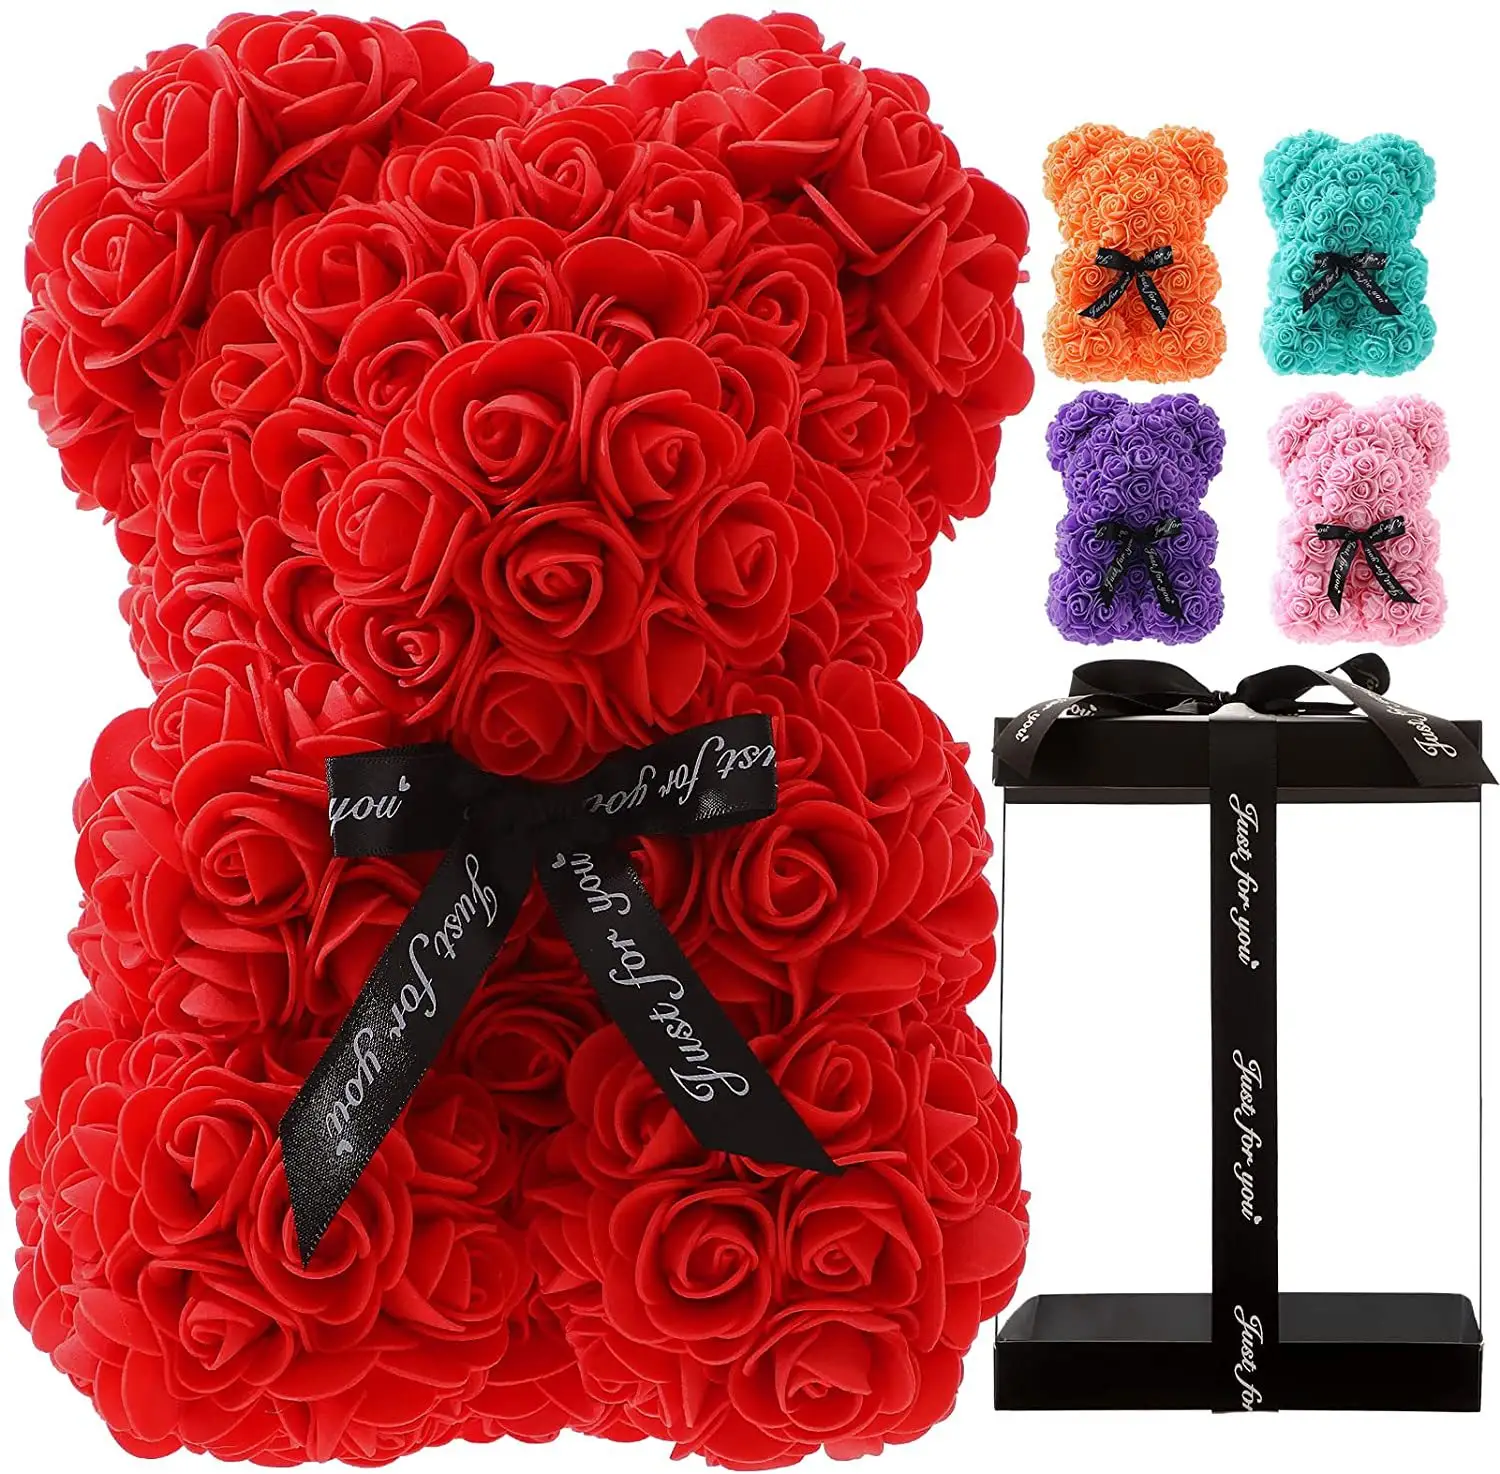 Popular and Premium Foam Artificial Romantic Rose Bear For Valentines Day Gifts